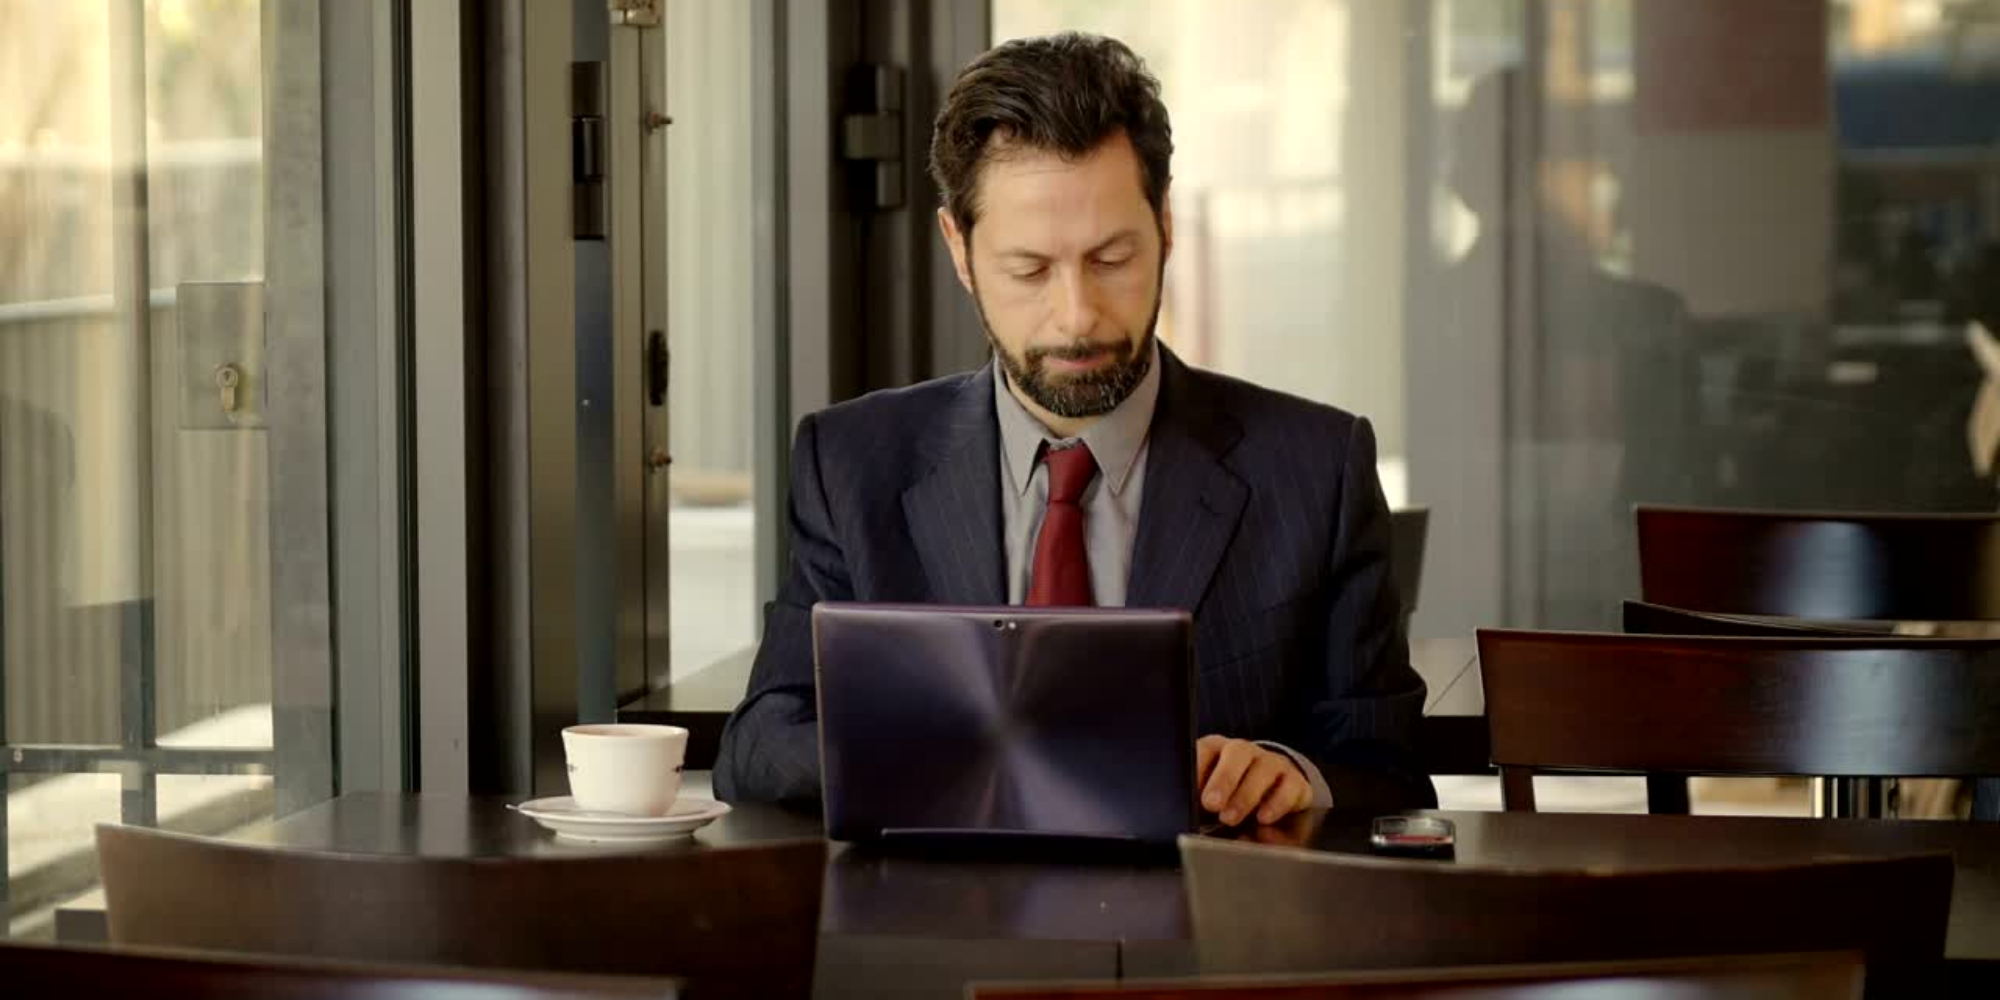 A paralegal in his office working with a tablet and a cup of coffee on the table.